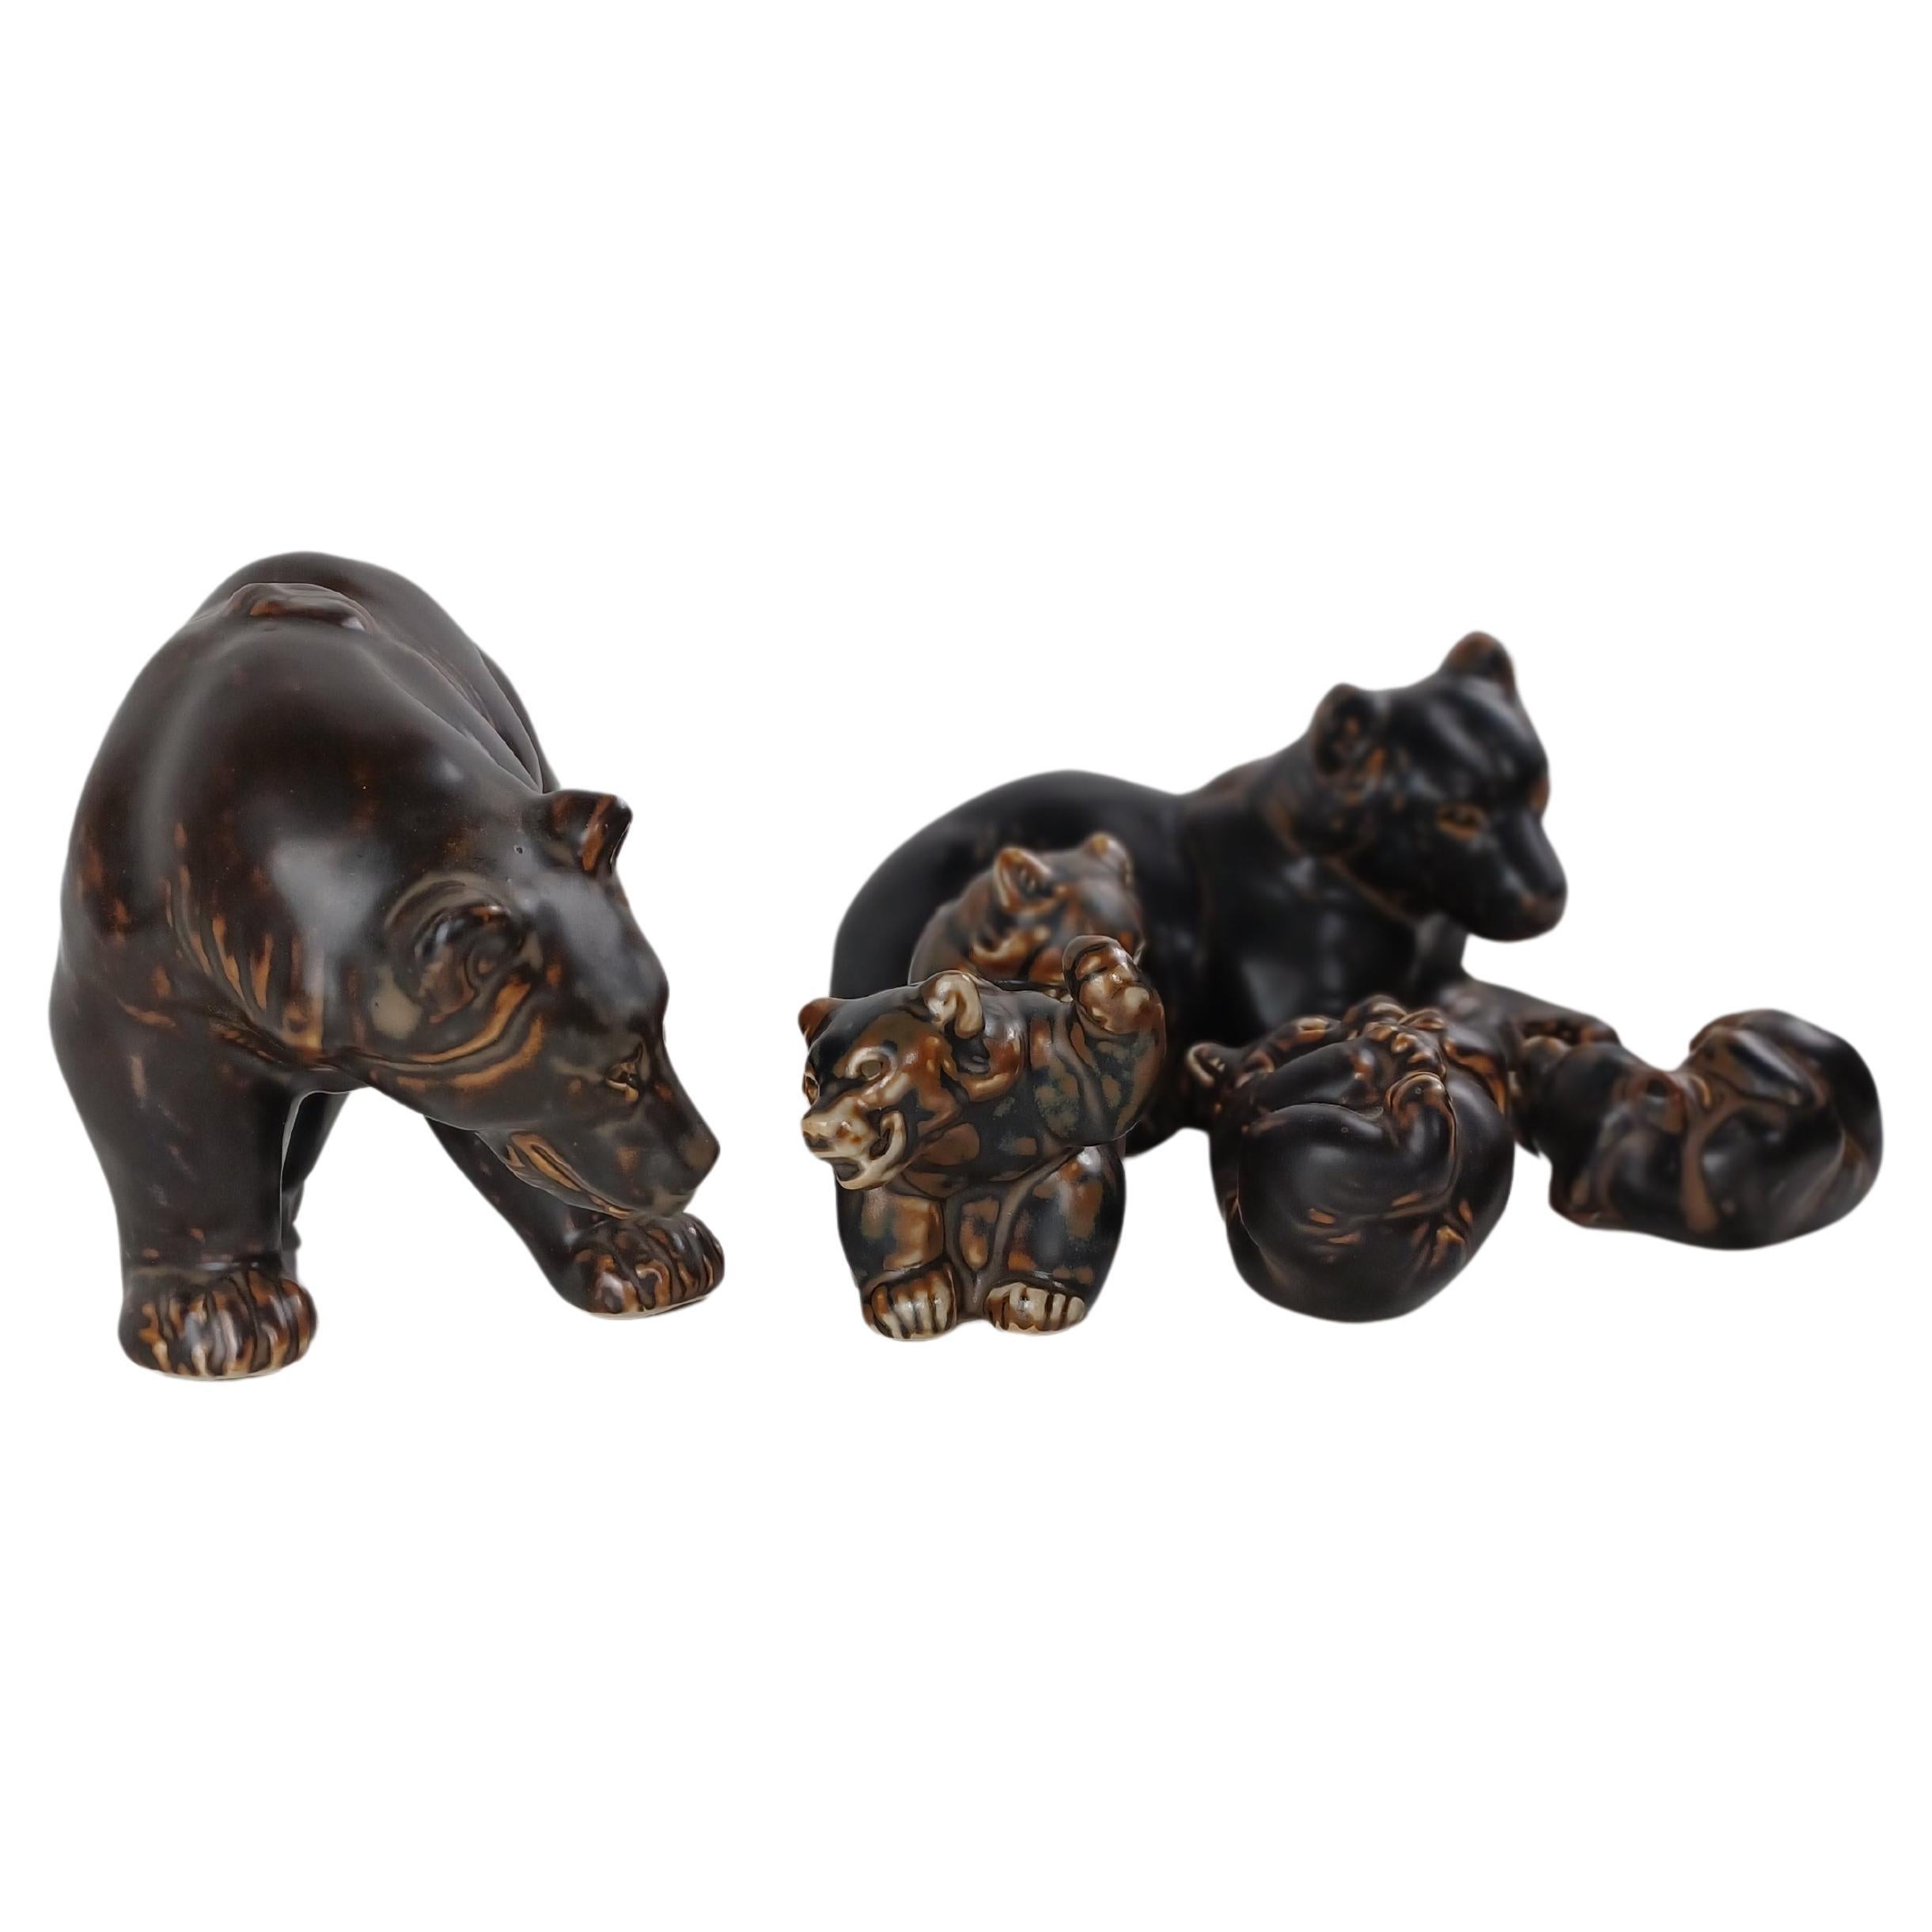 Danish Knud Kyhn bear family figurines for Royal Copenhagen

The lively bears were created by Knud Kyhn (1880-1969) in 1957. Knud Kyhn worked for for Royal Copenhagen from 1903-1910, 1924-1932 and 1936-1967. During this period he created many